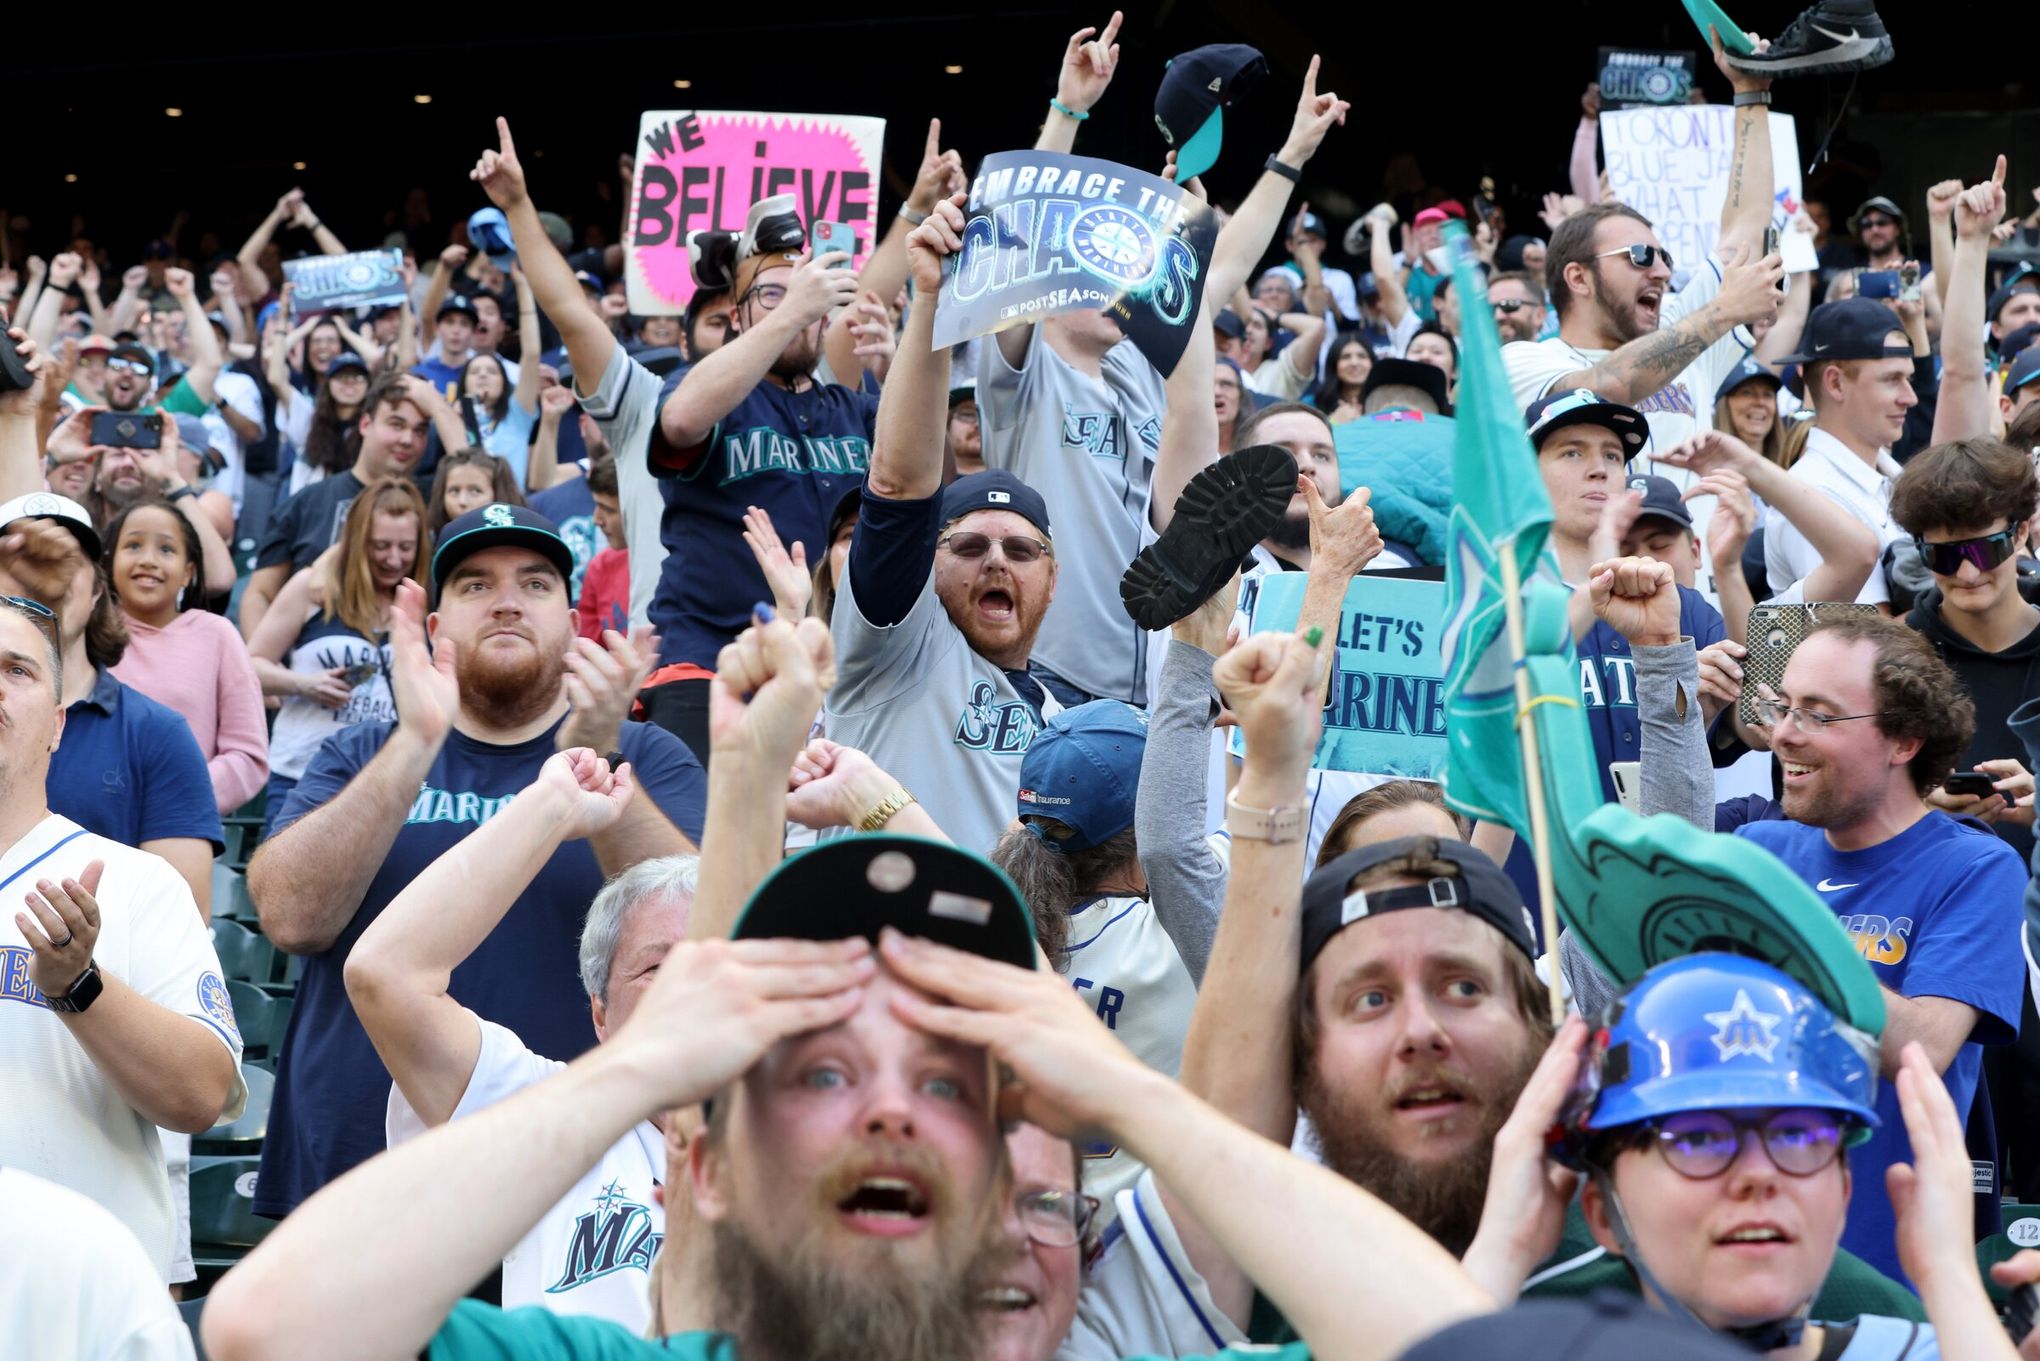 It's hard not to overreact when the Mariners are playing into fans